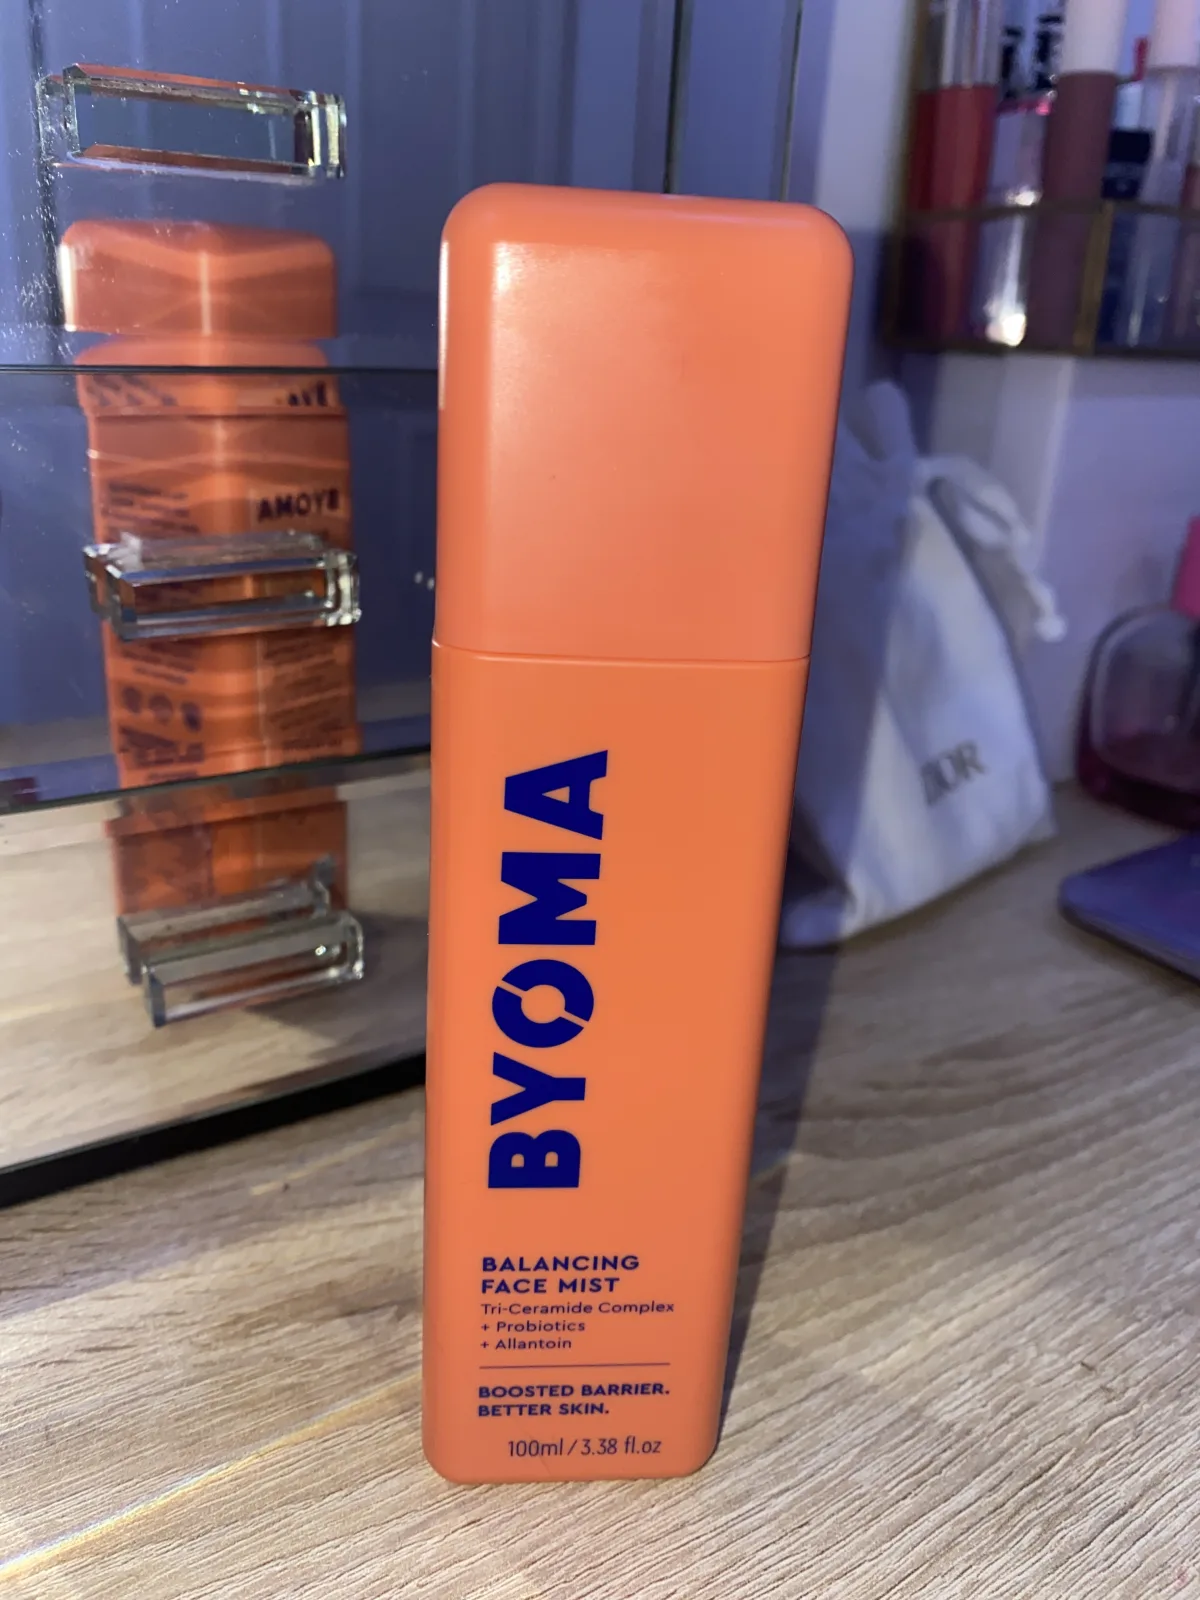 BYOMA Balancing Hydrating Face Mist 100ml - before review image